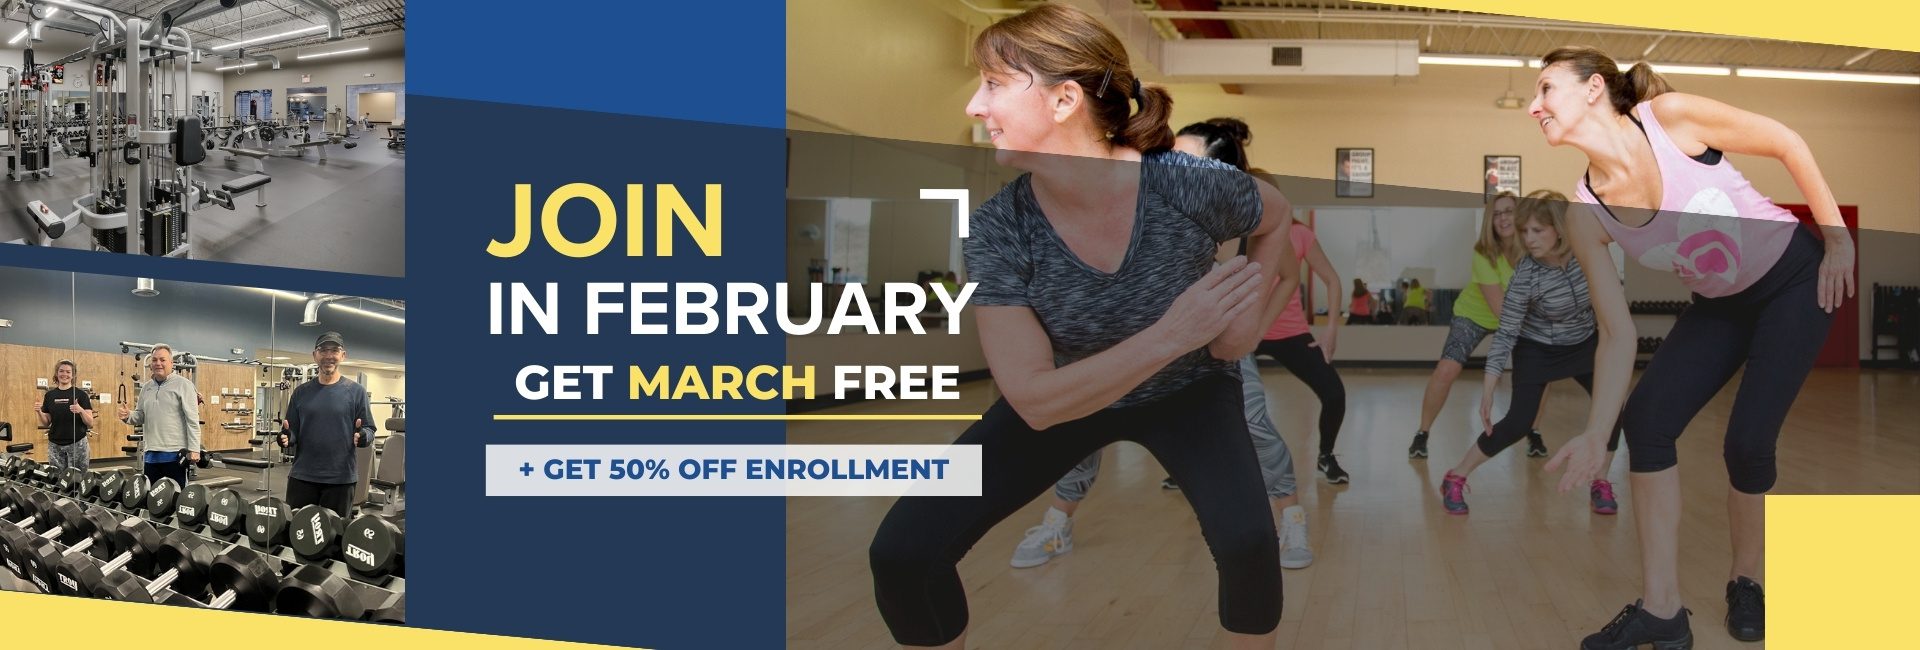 offer february - join get march free + 50% enrollment